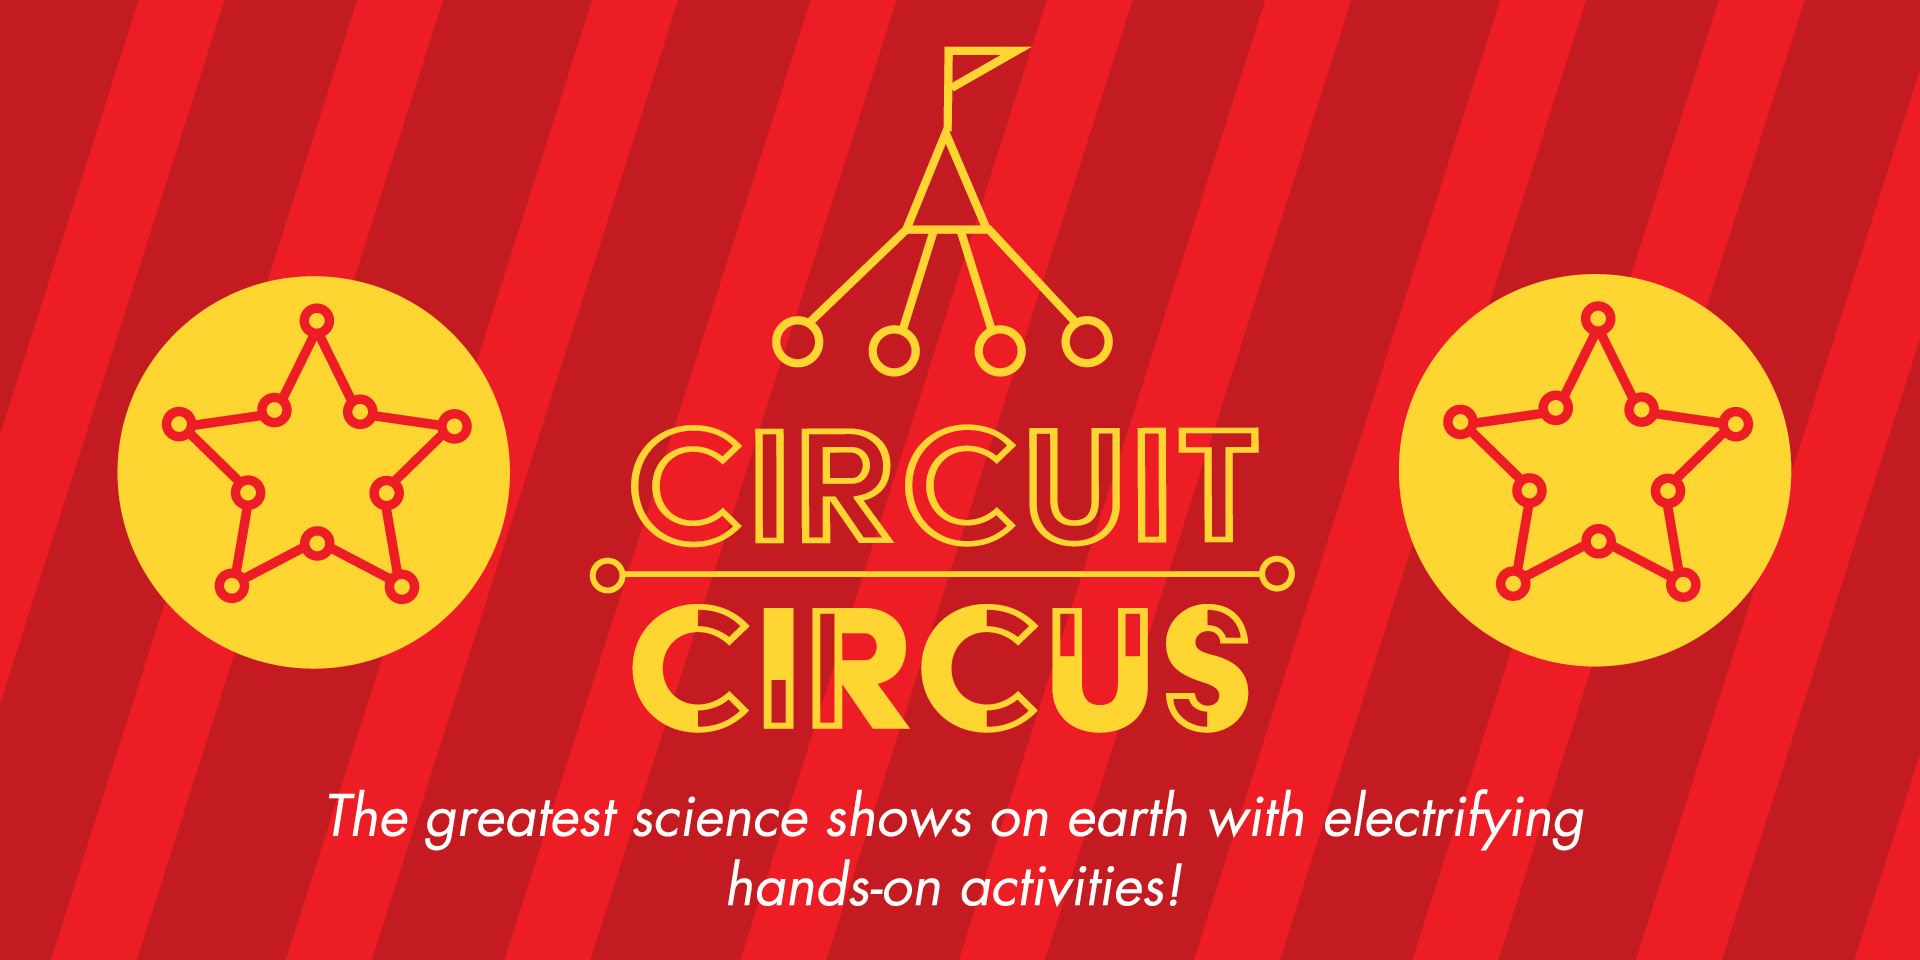 Circuit Circus: The greatest science shows on earth with electrifying hands-on activities.